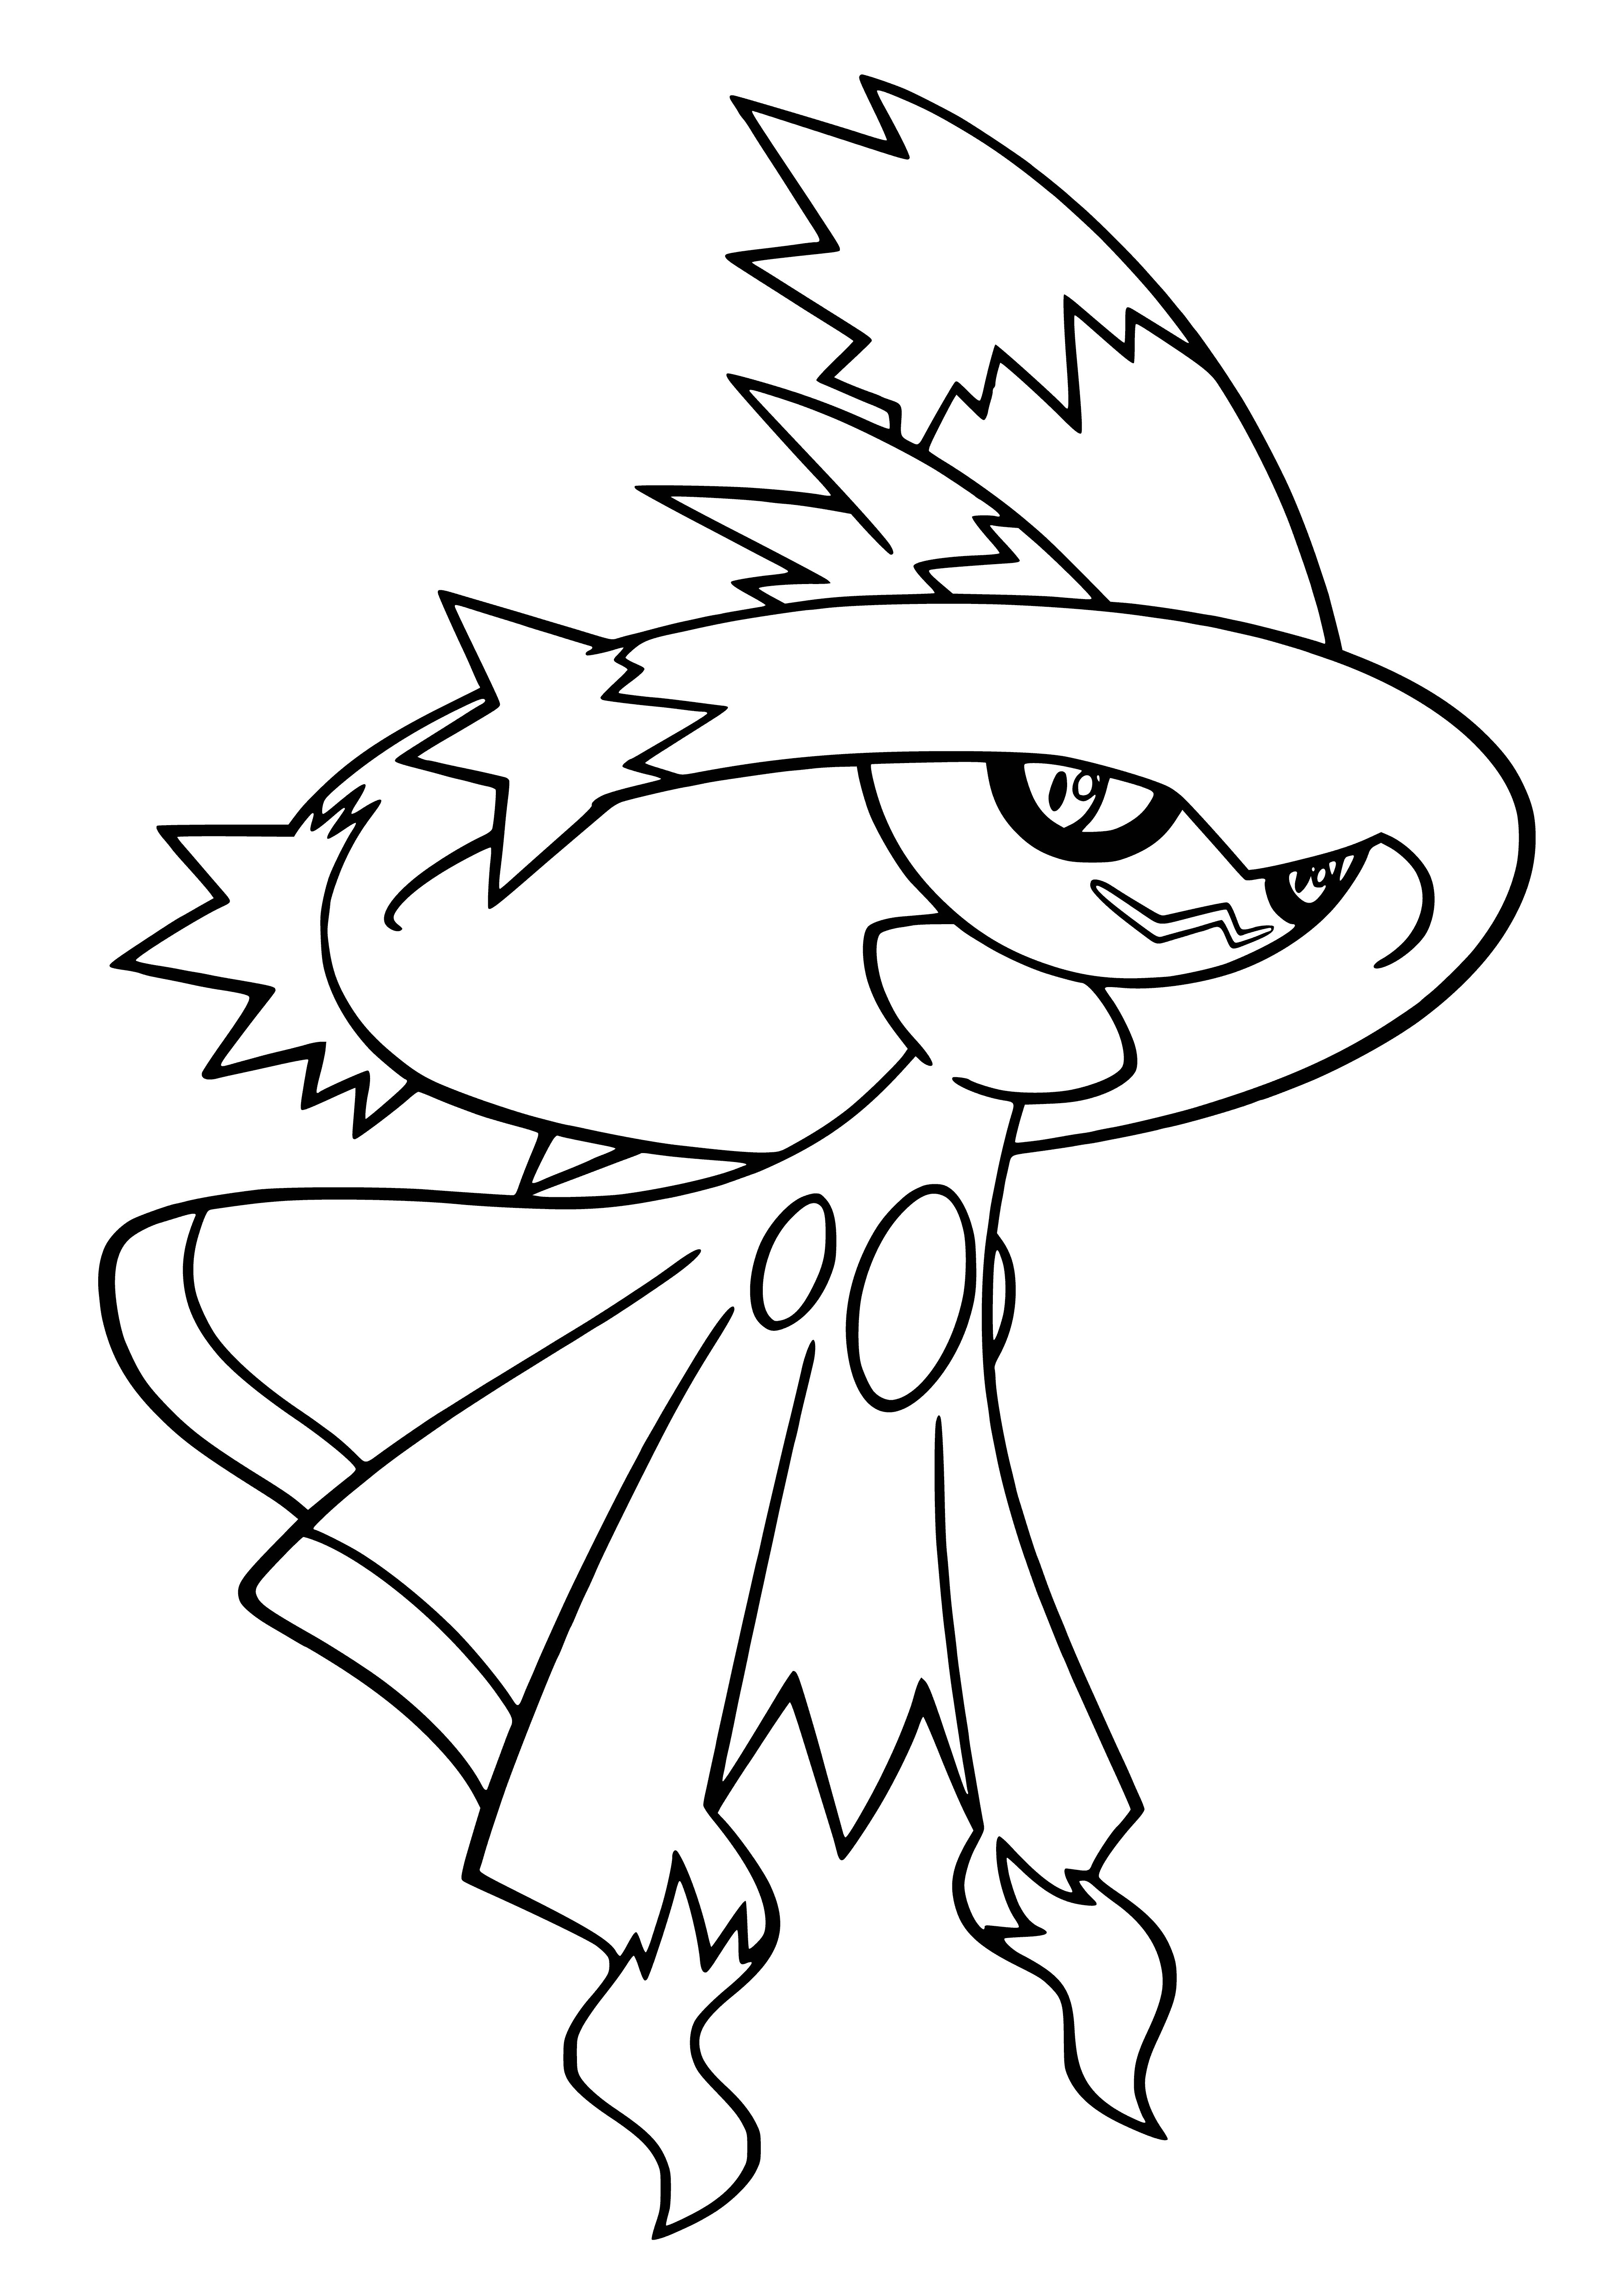 coloring page: Ghost-like Pokemon w/floating pointy appendages, large black eyes & white star mark on forehead. Small wings on back & slender opaque body. #Pokemon